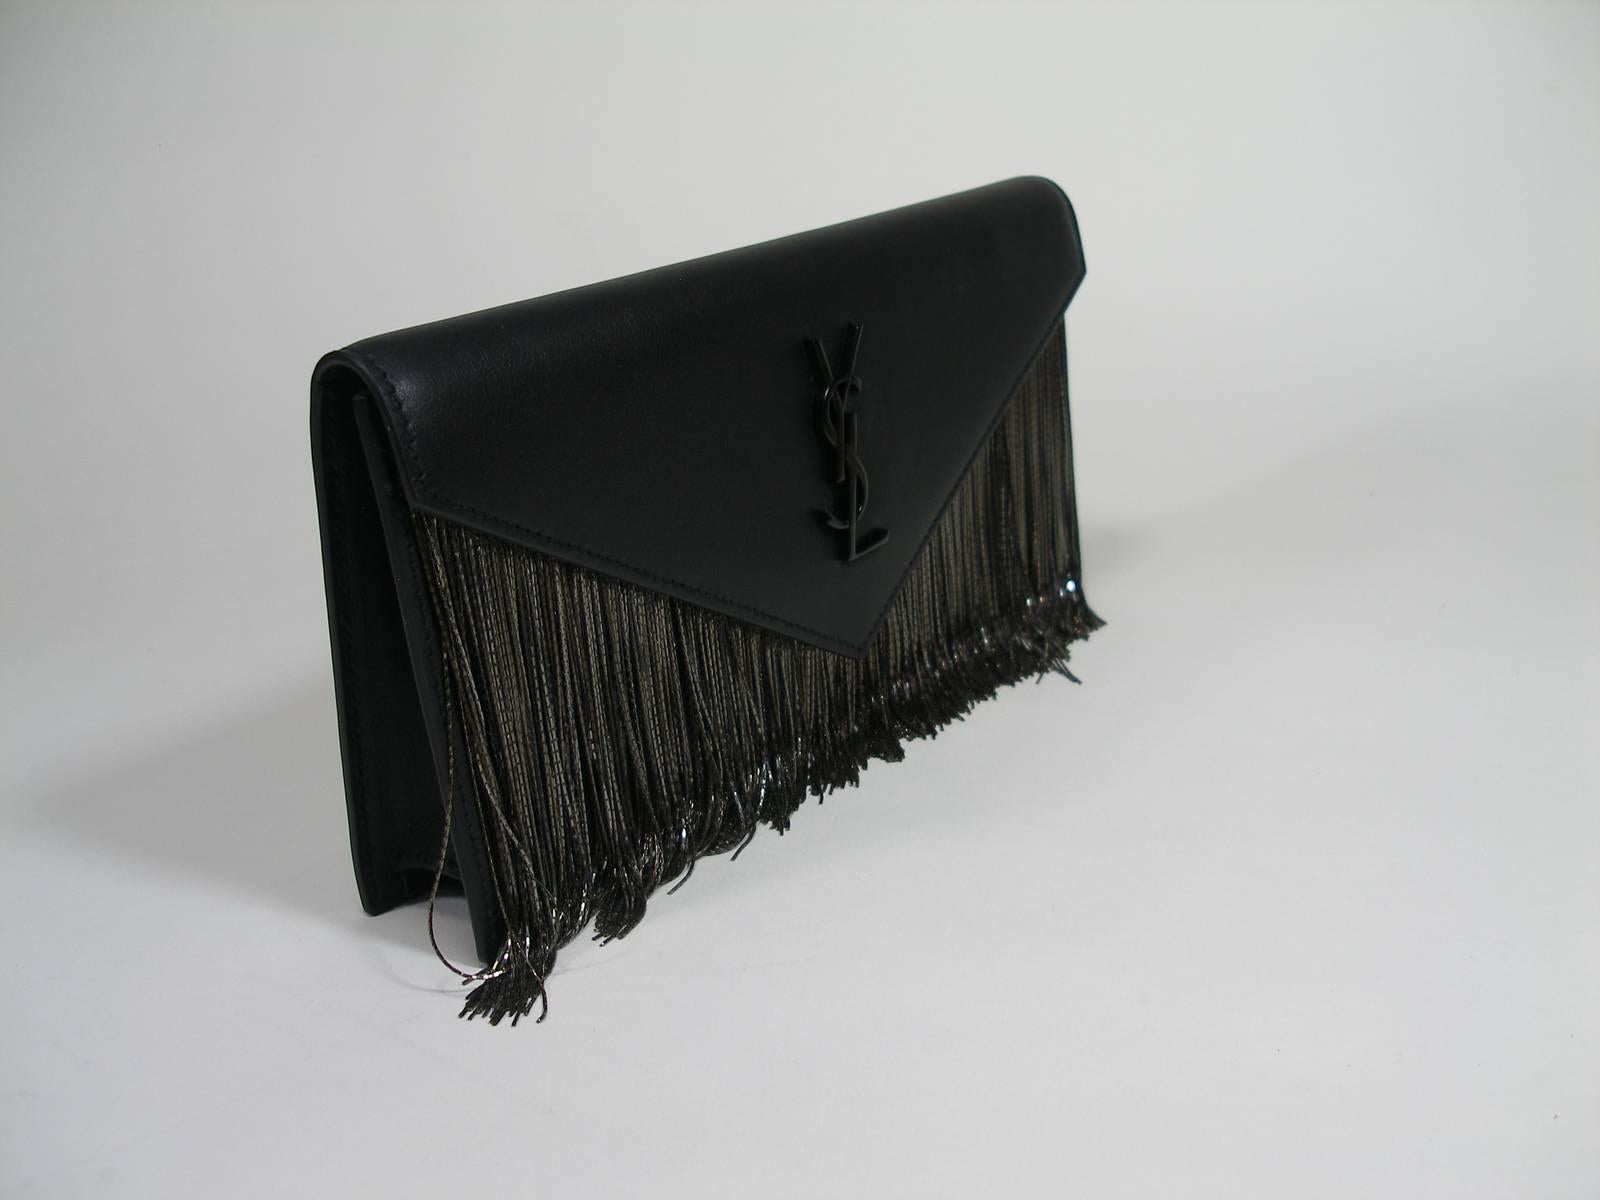 Yves Saint Laurent Metallic Fringes clutch bag in black leather
Sold out every where 
Magnetic snap button
YSL in metal 
Metal chain fringes.
Dimensions 24 X 12 X 4 cm
100% Calfskin leather
Matte black metal hardware
Its comes with YSL dustbag ,